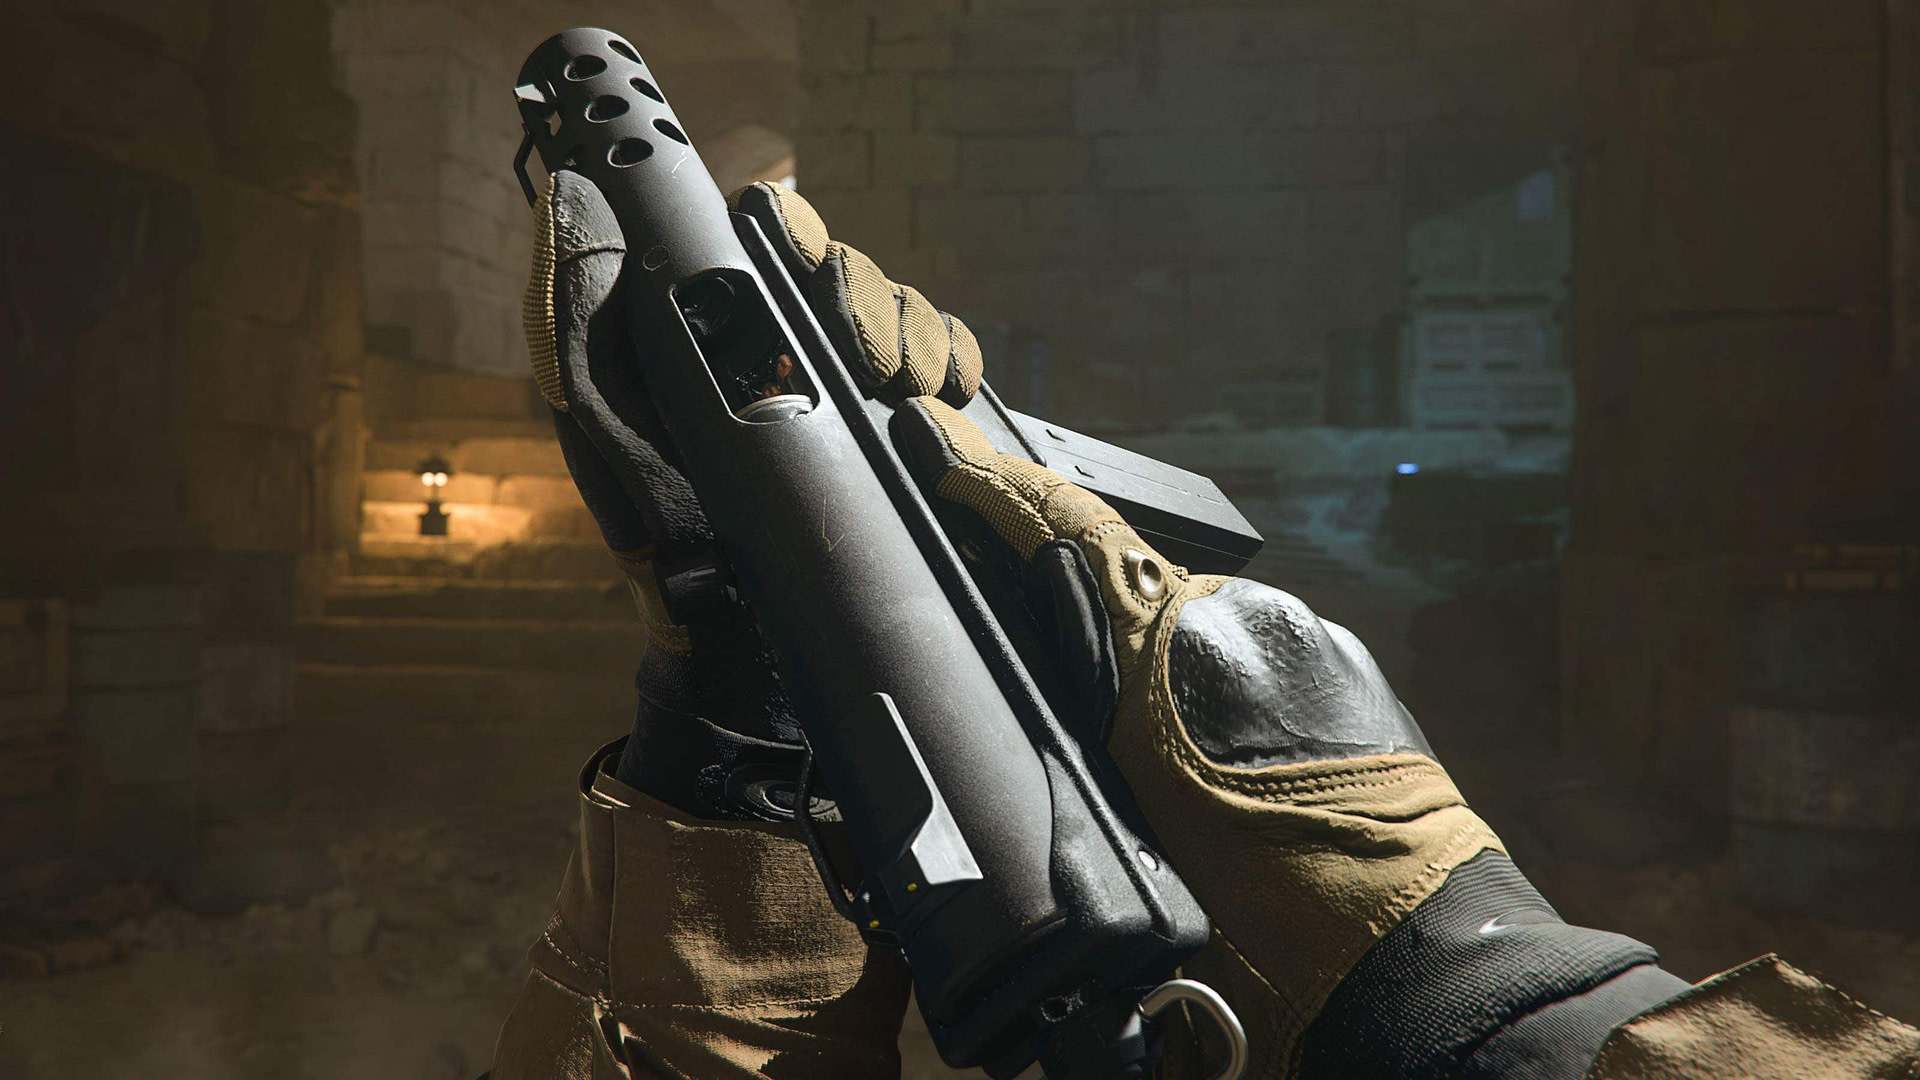 CoD: MW2 And Warzone Season 3 Reloaded – New Weapons And How To Unlock Them